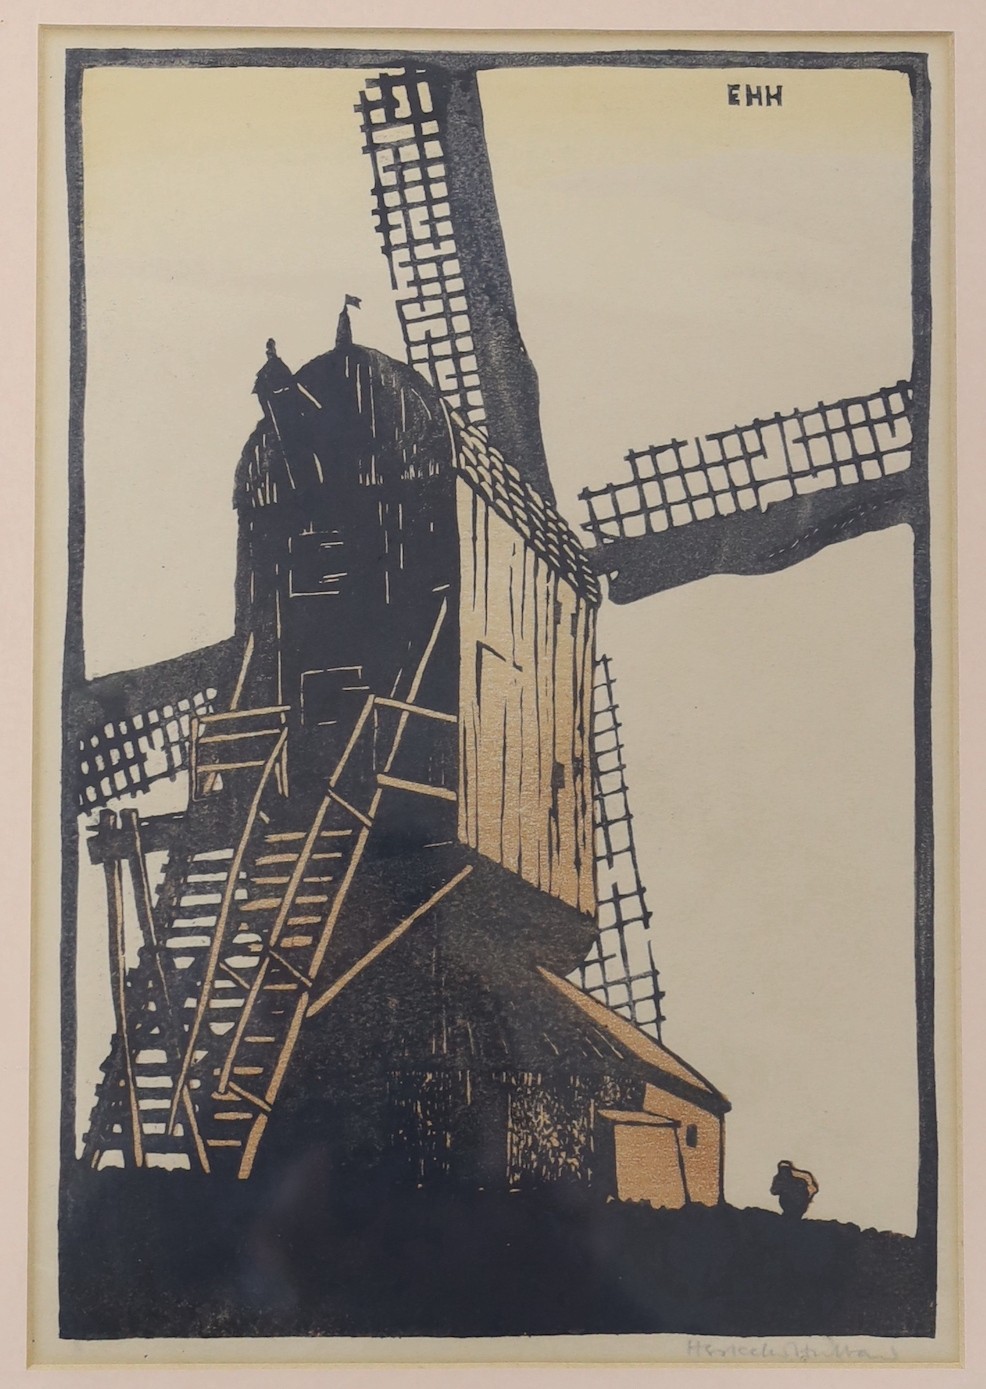 Eric Hesketh Hubbard (1892-1957), wood engraving, 'Windmill, Enkhuisen, Holland', signed in pencil, 31 x 21cm